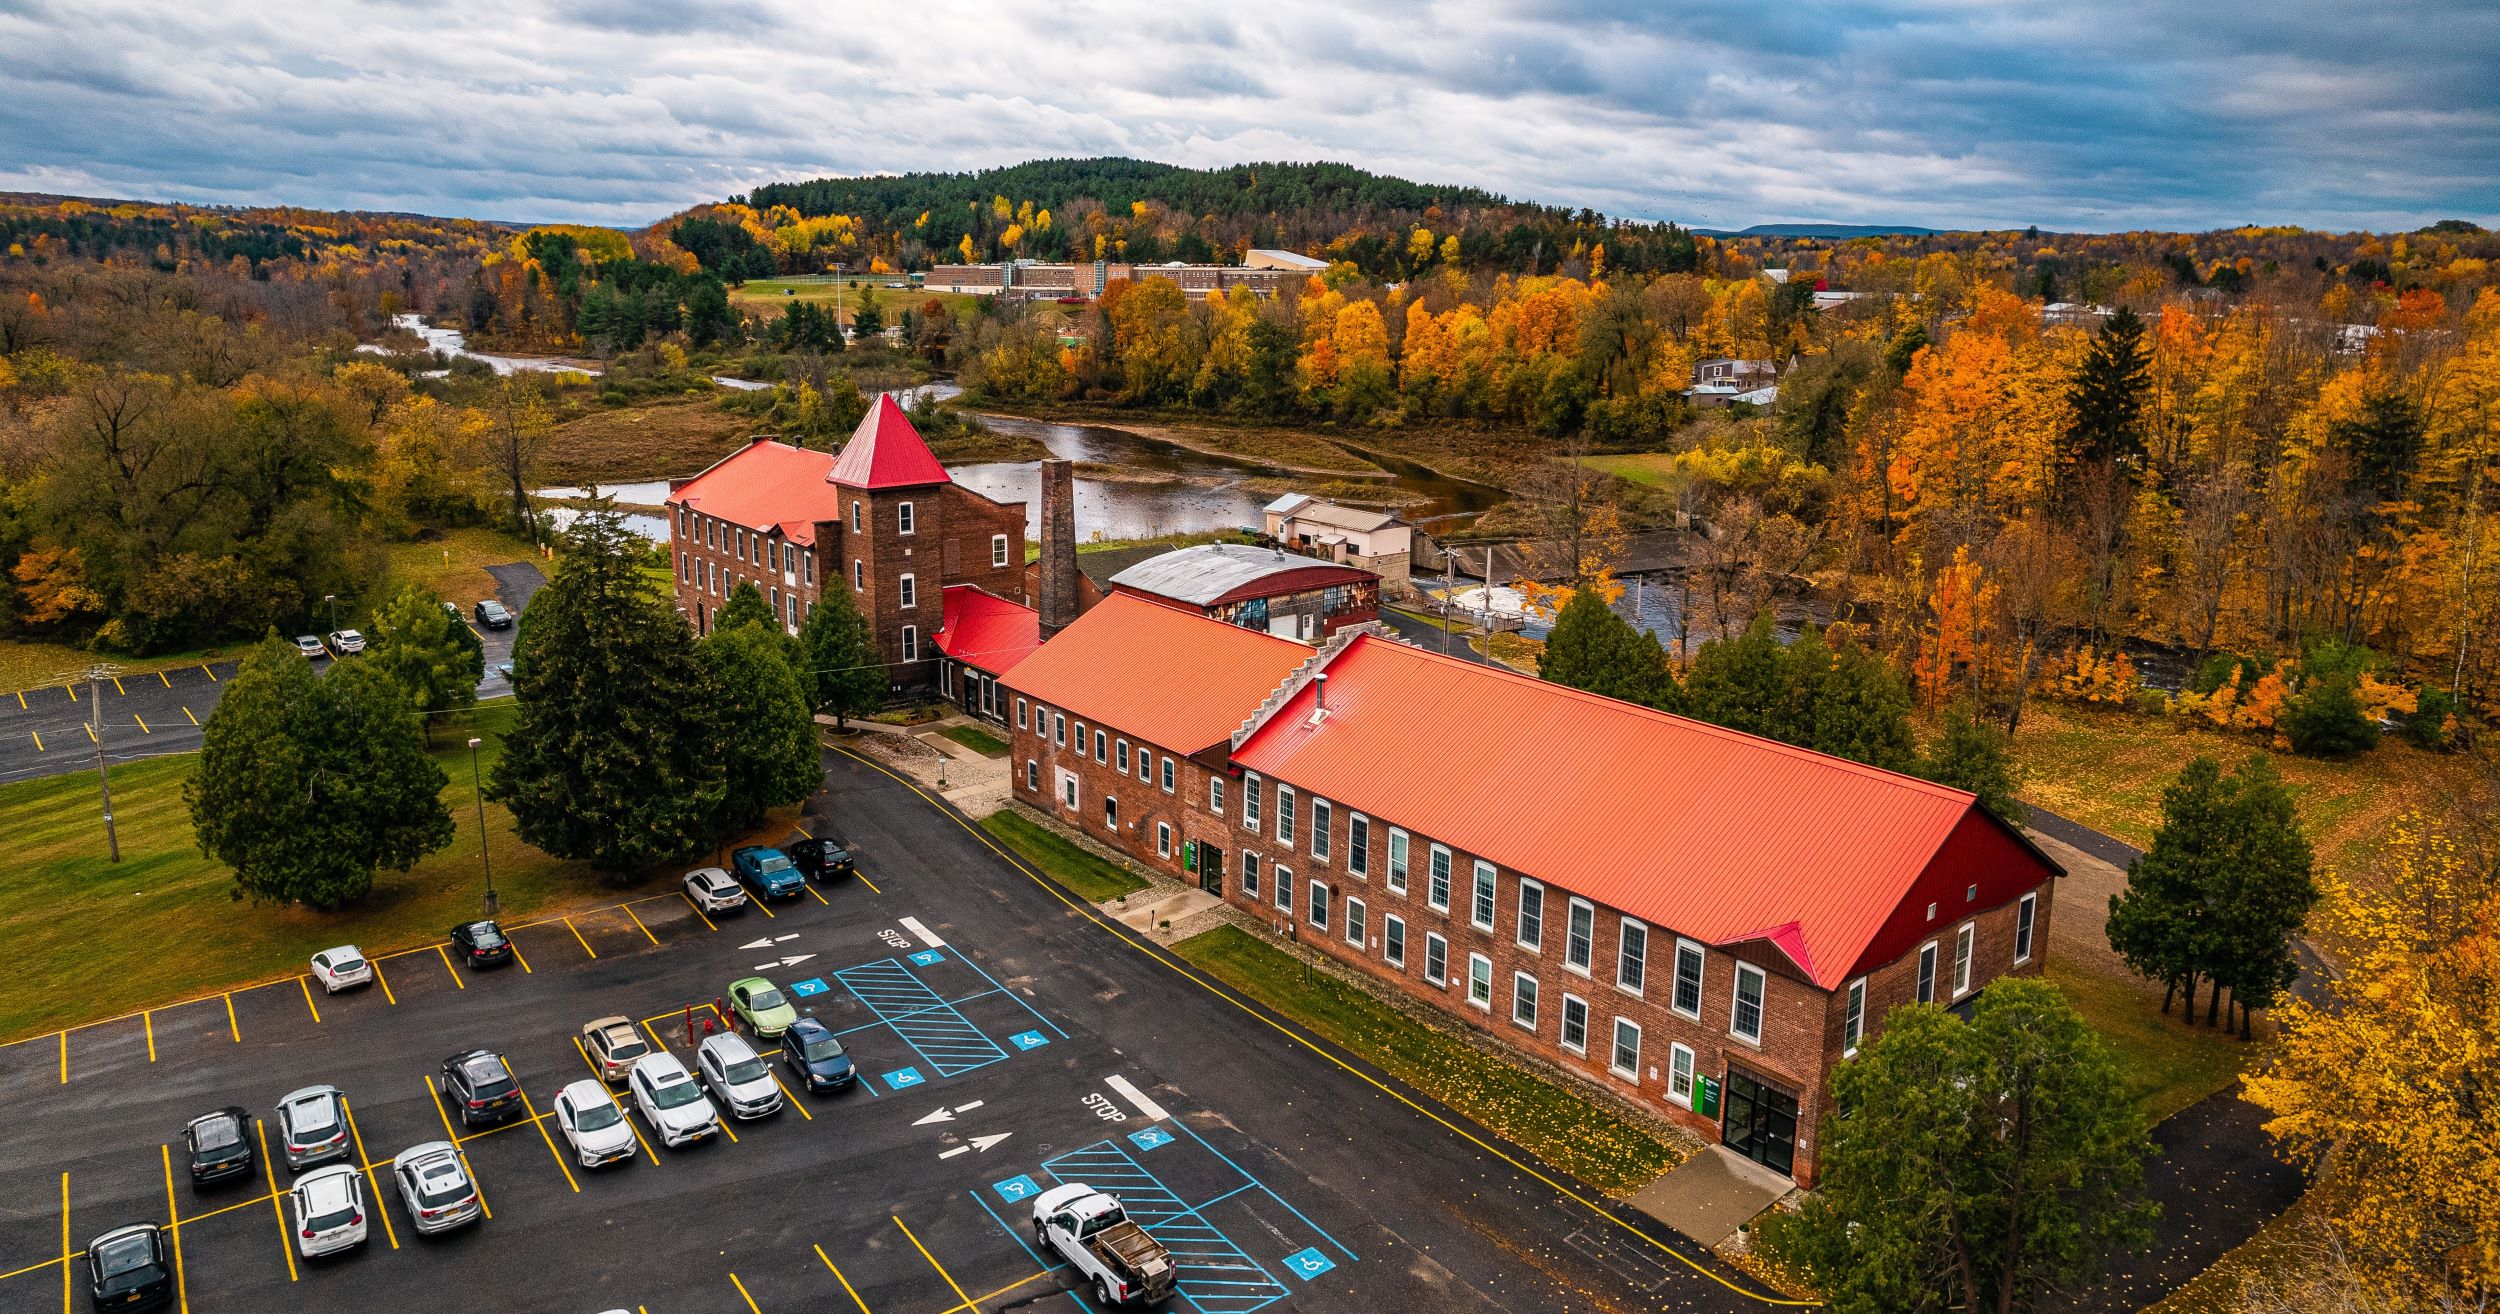 The college's Malone campus in the Fall